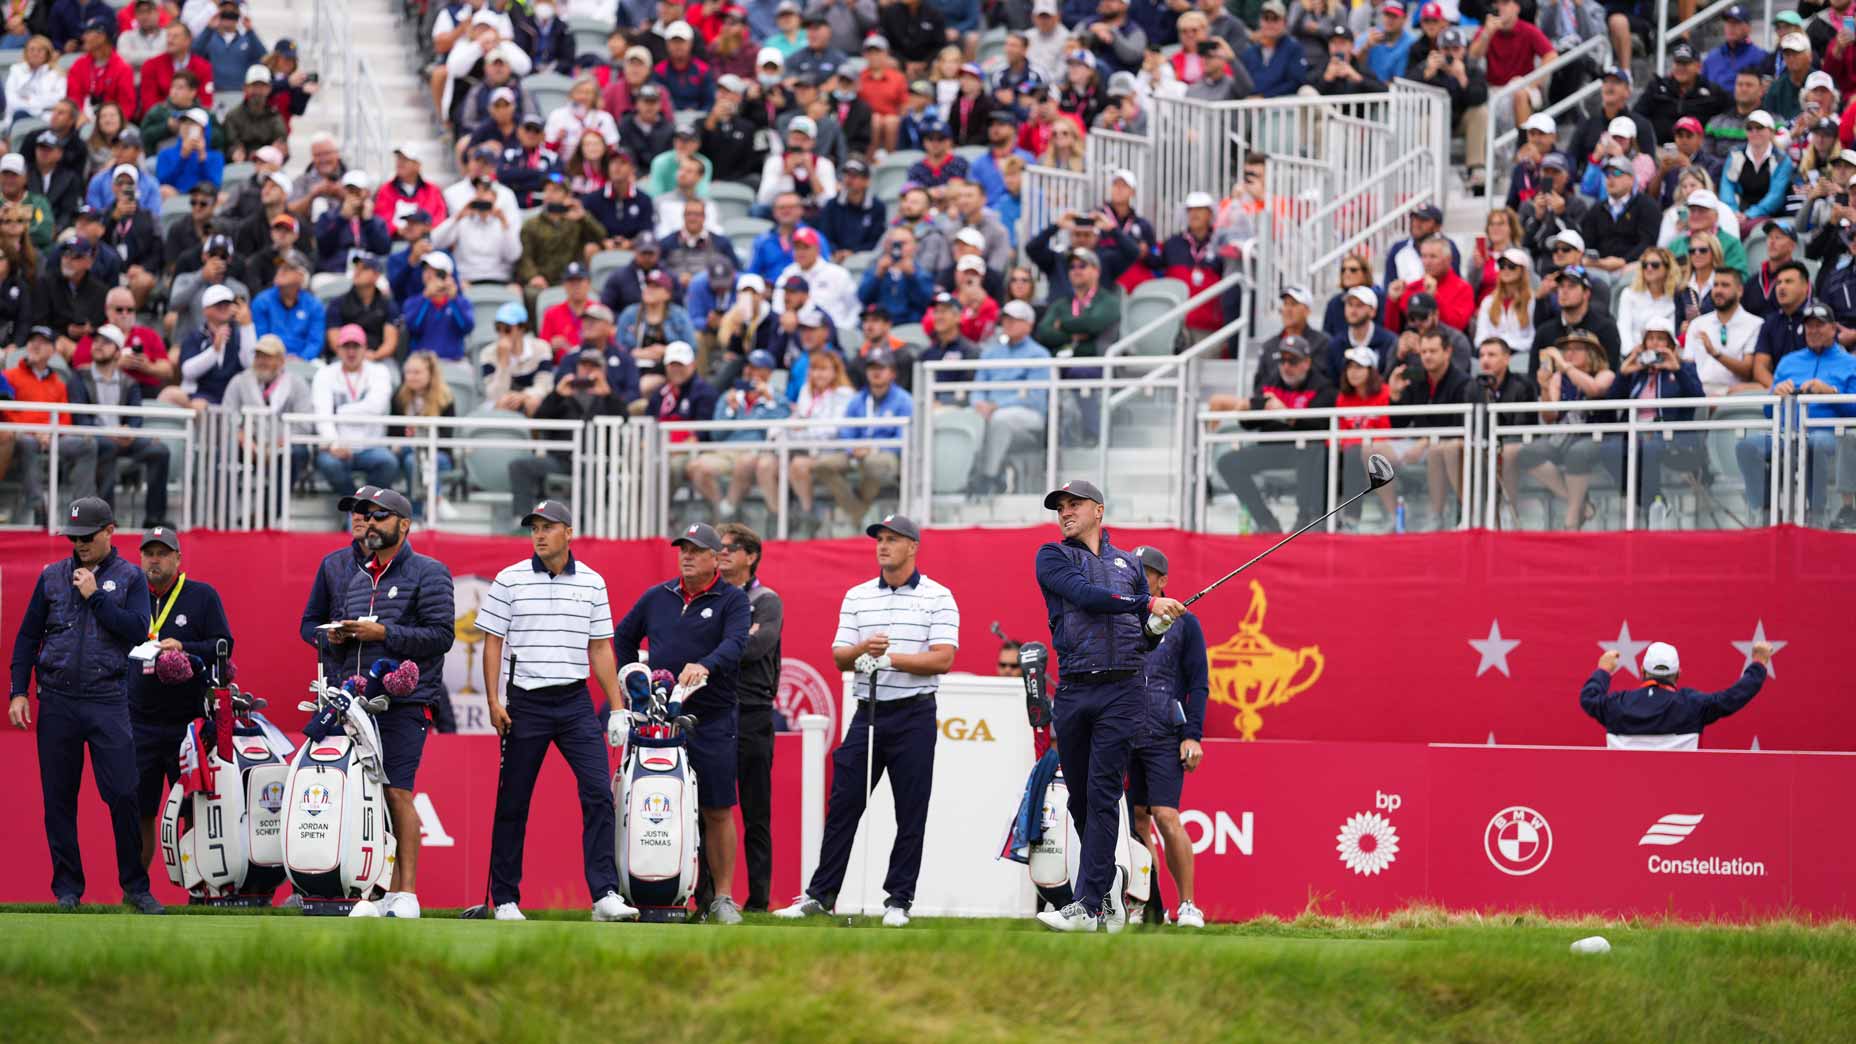 2021 Ryder Cup TV schedule How to watch the Ryder Cup on TV